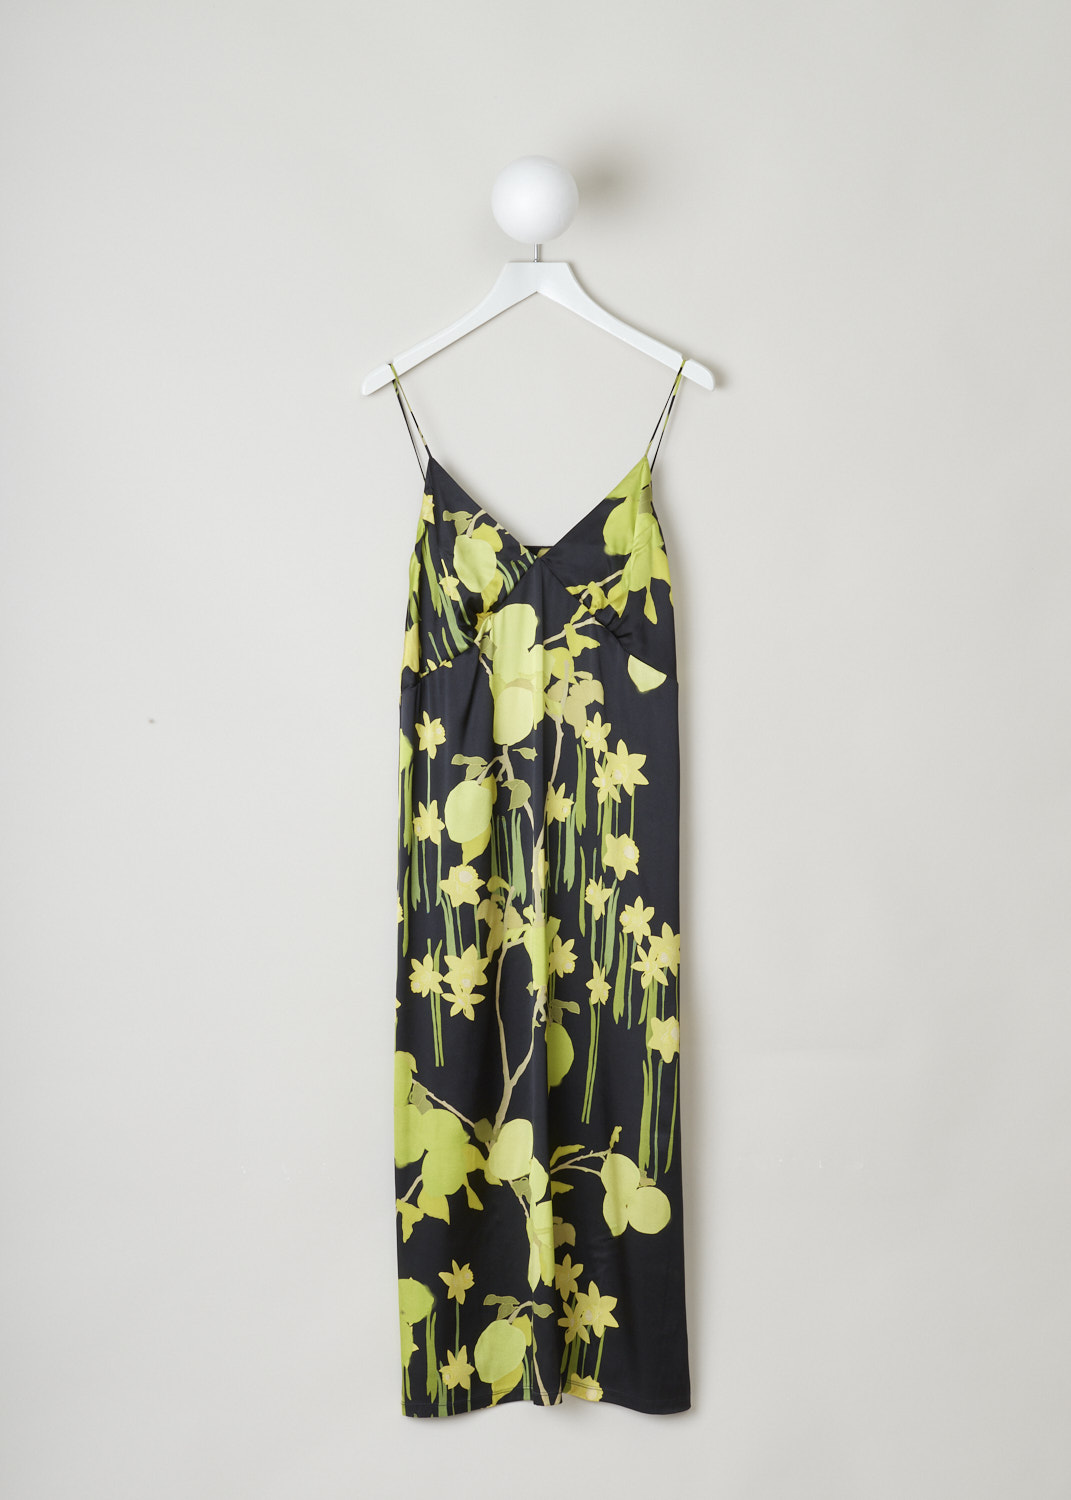 BERNADETTE, BLACK SILK SLIP DRESS WITH VIBRANT PRINT, HS22_RTW_SLDRESS_JEA_SSS_2, Black, Print, Front, Silky smooth black satin midi dress with lime green print. The dress has a V-shaped neckline with barely-there straps. It's decorated with vibrant lemons and daffodils. 